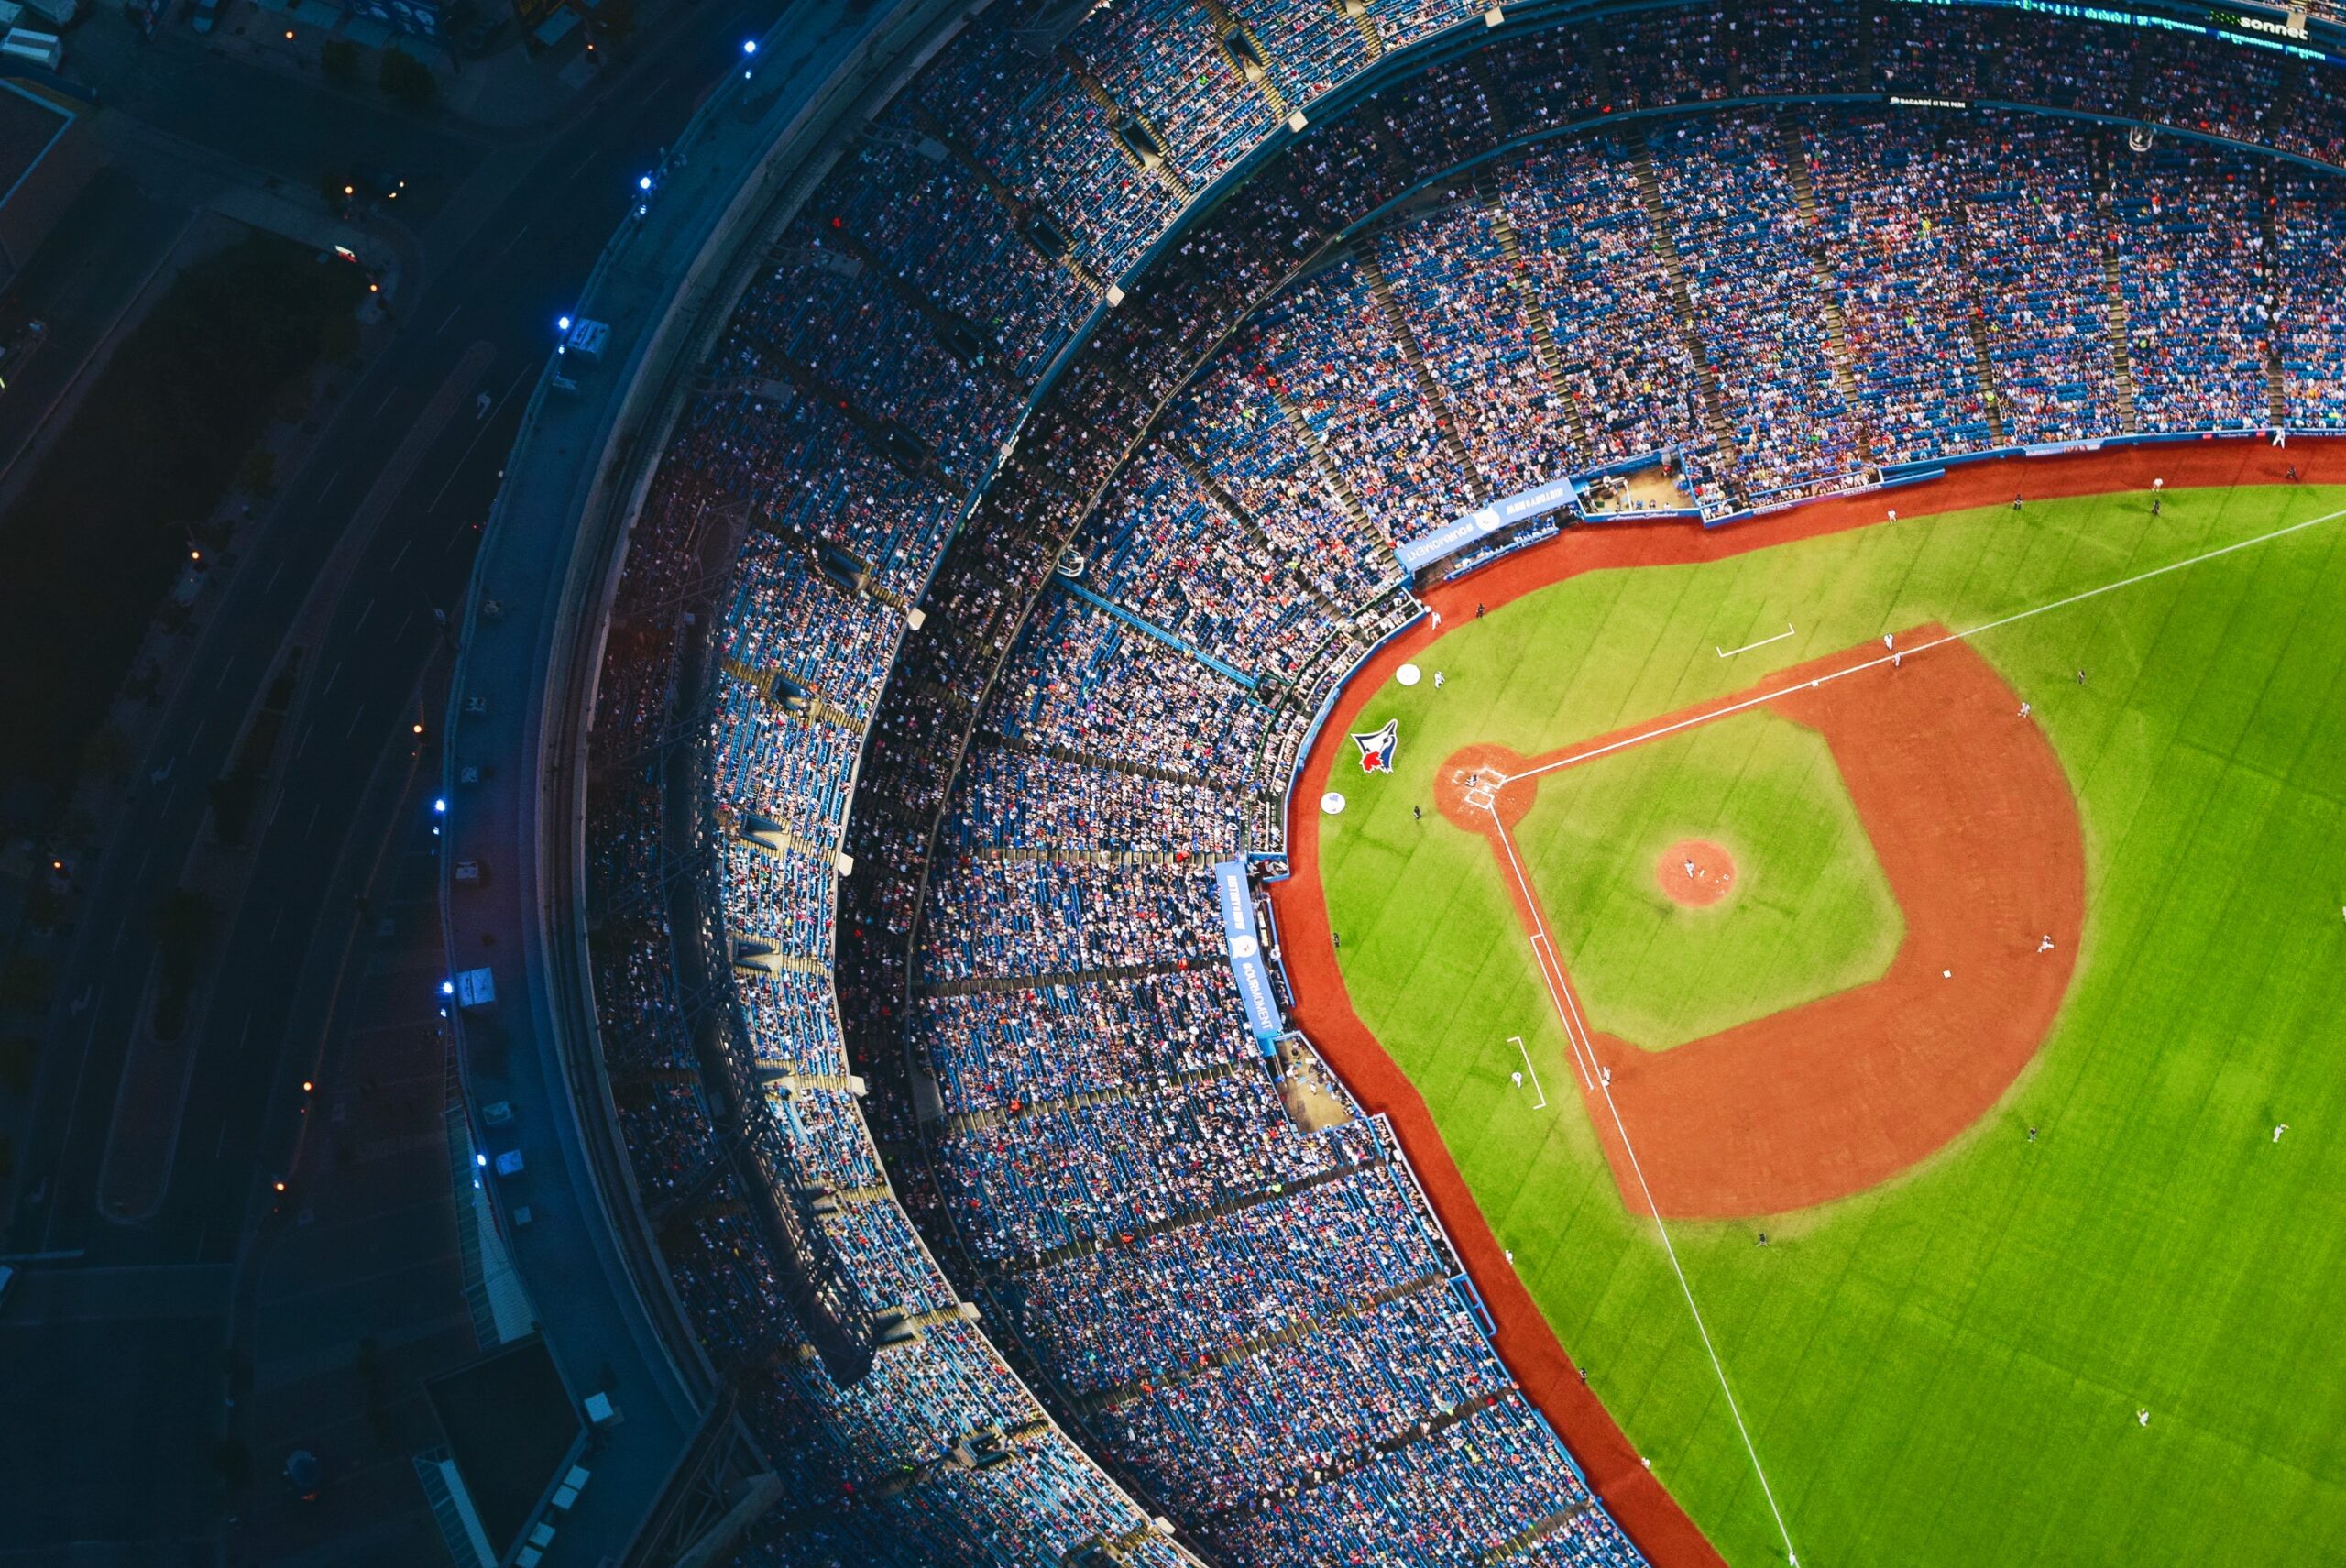 Overhead view of baseball field and stadium full of fans